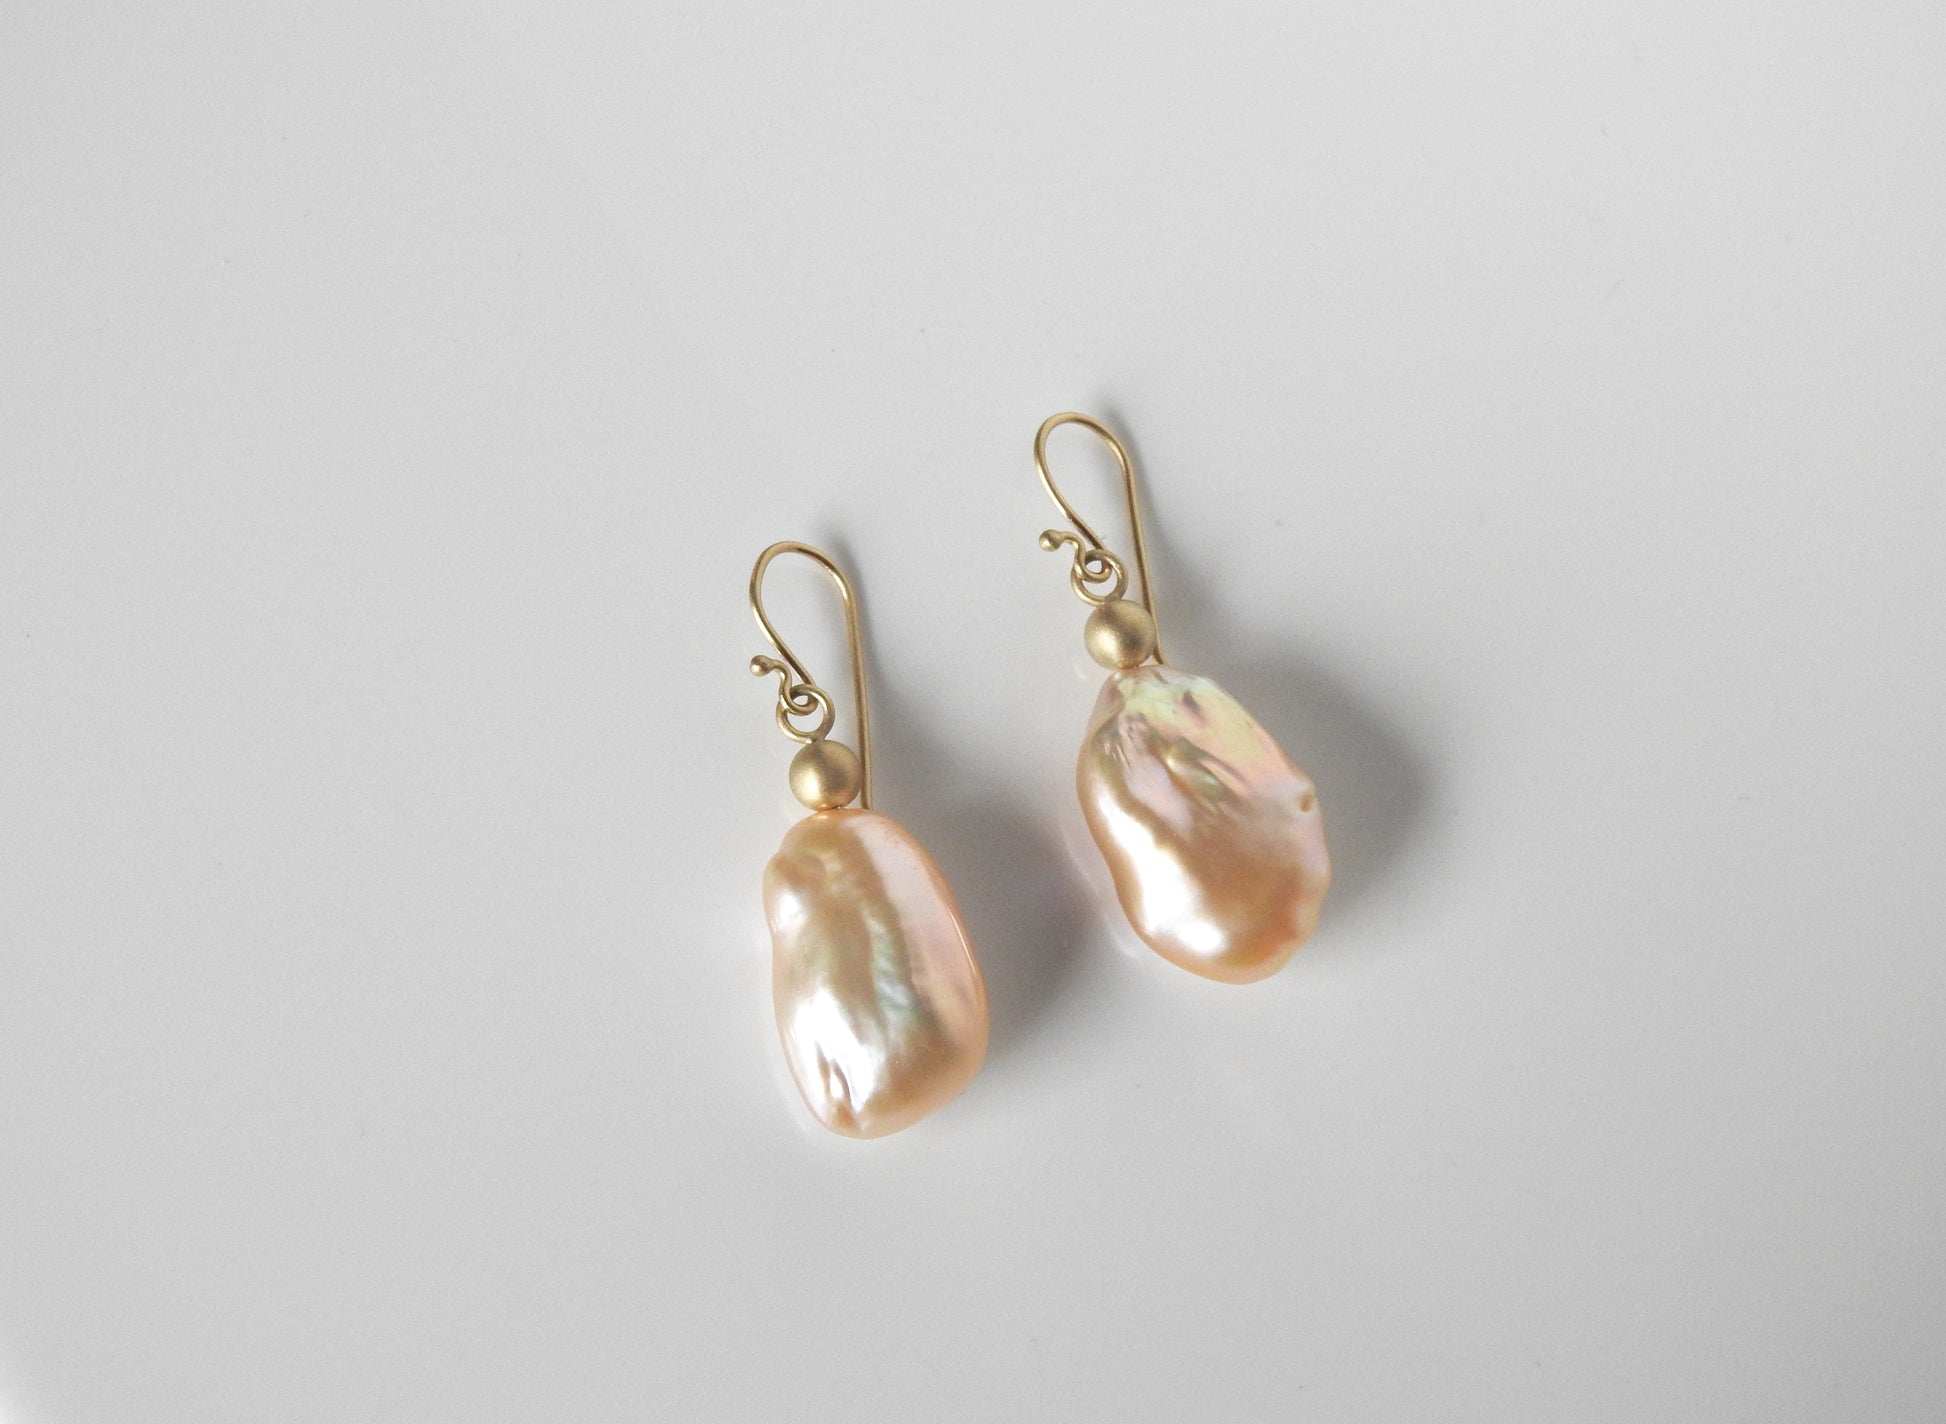 Bold organic and rich with there 18kt accent beads and wires.  Gorgeous peach/pink baroques, so bold yet so light, by ZEALmetal, Nicole Horlor, in Kingston, ON Canada